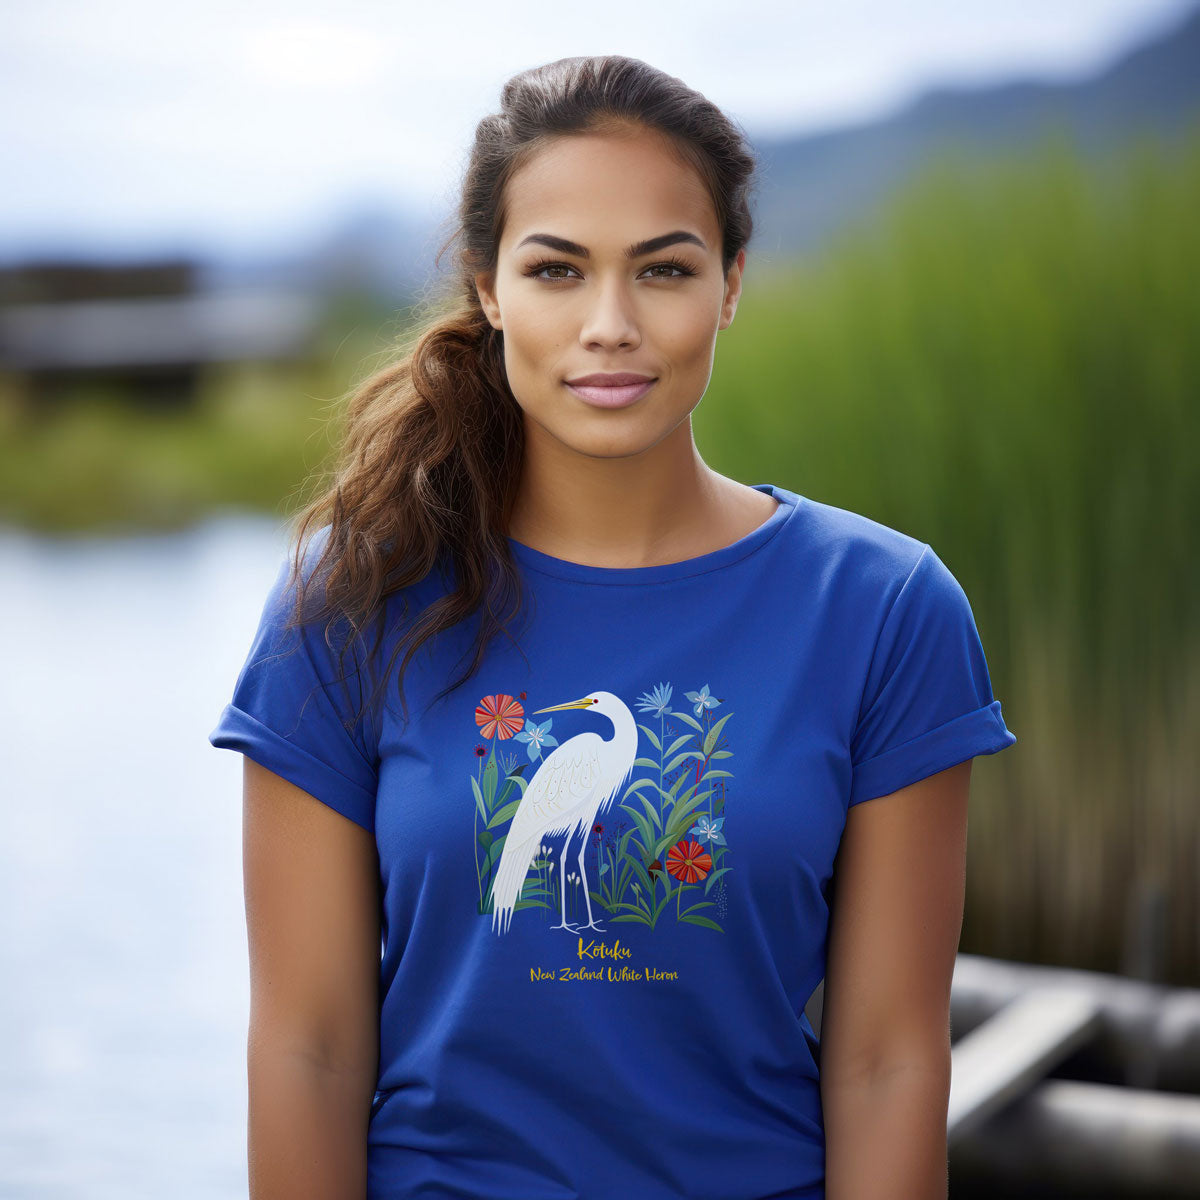 young woman wearing a royal blue t-shirt with a New Zealand Kōtuku white heron print